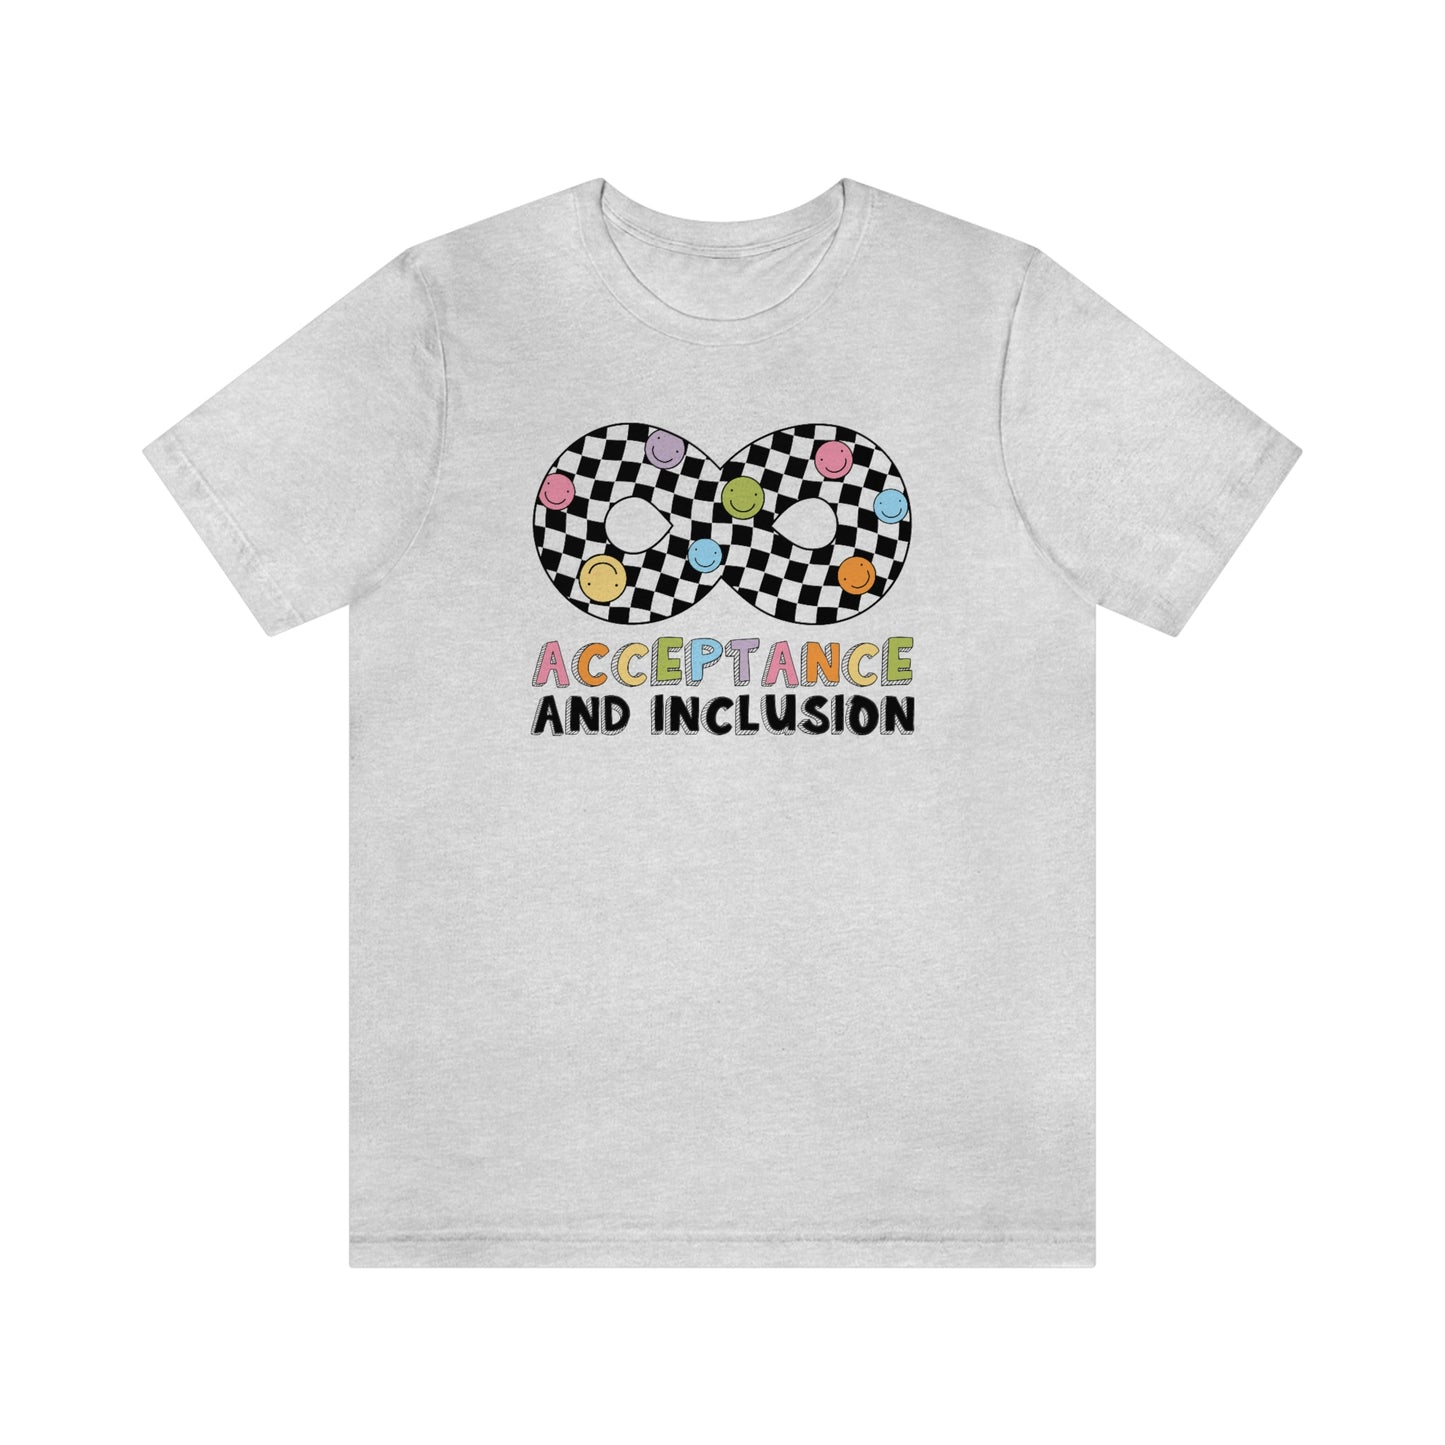 Acceptance and Inclusion Jersey T-Shirt